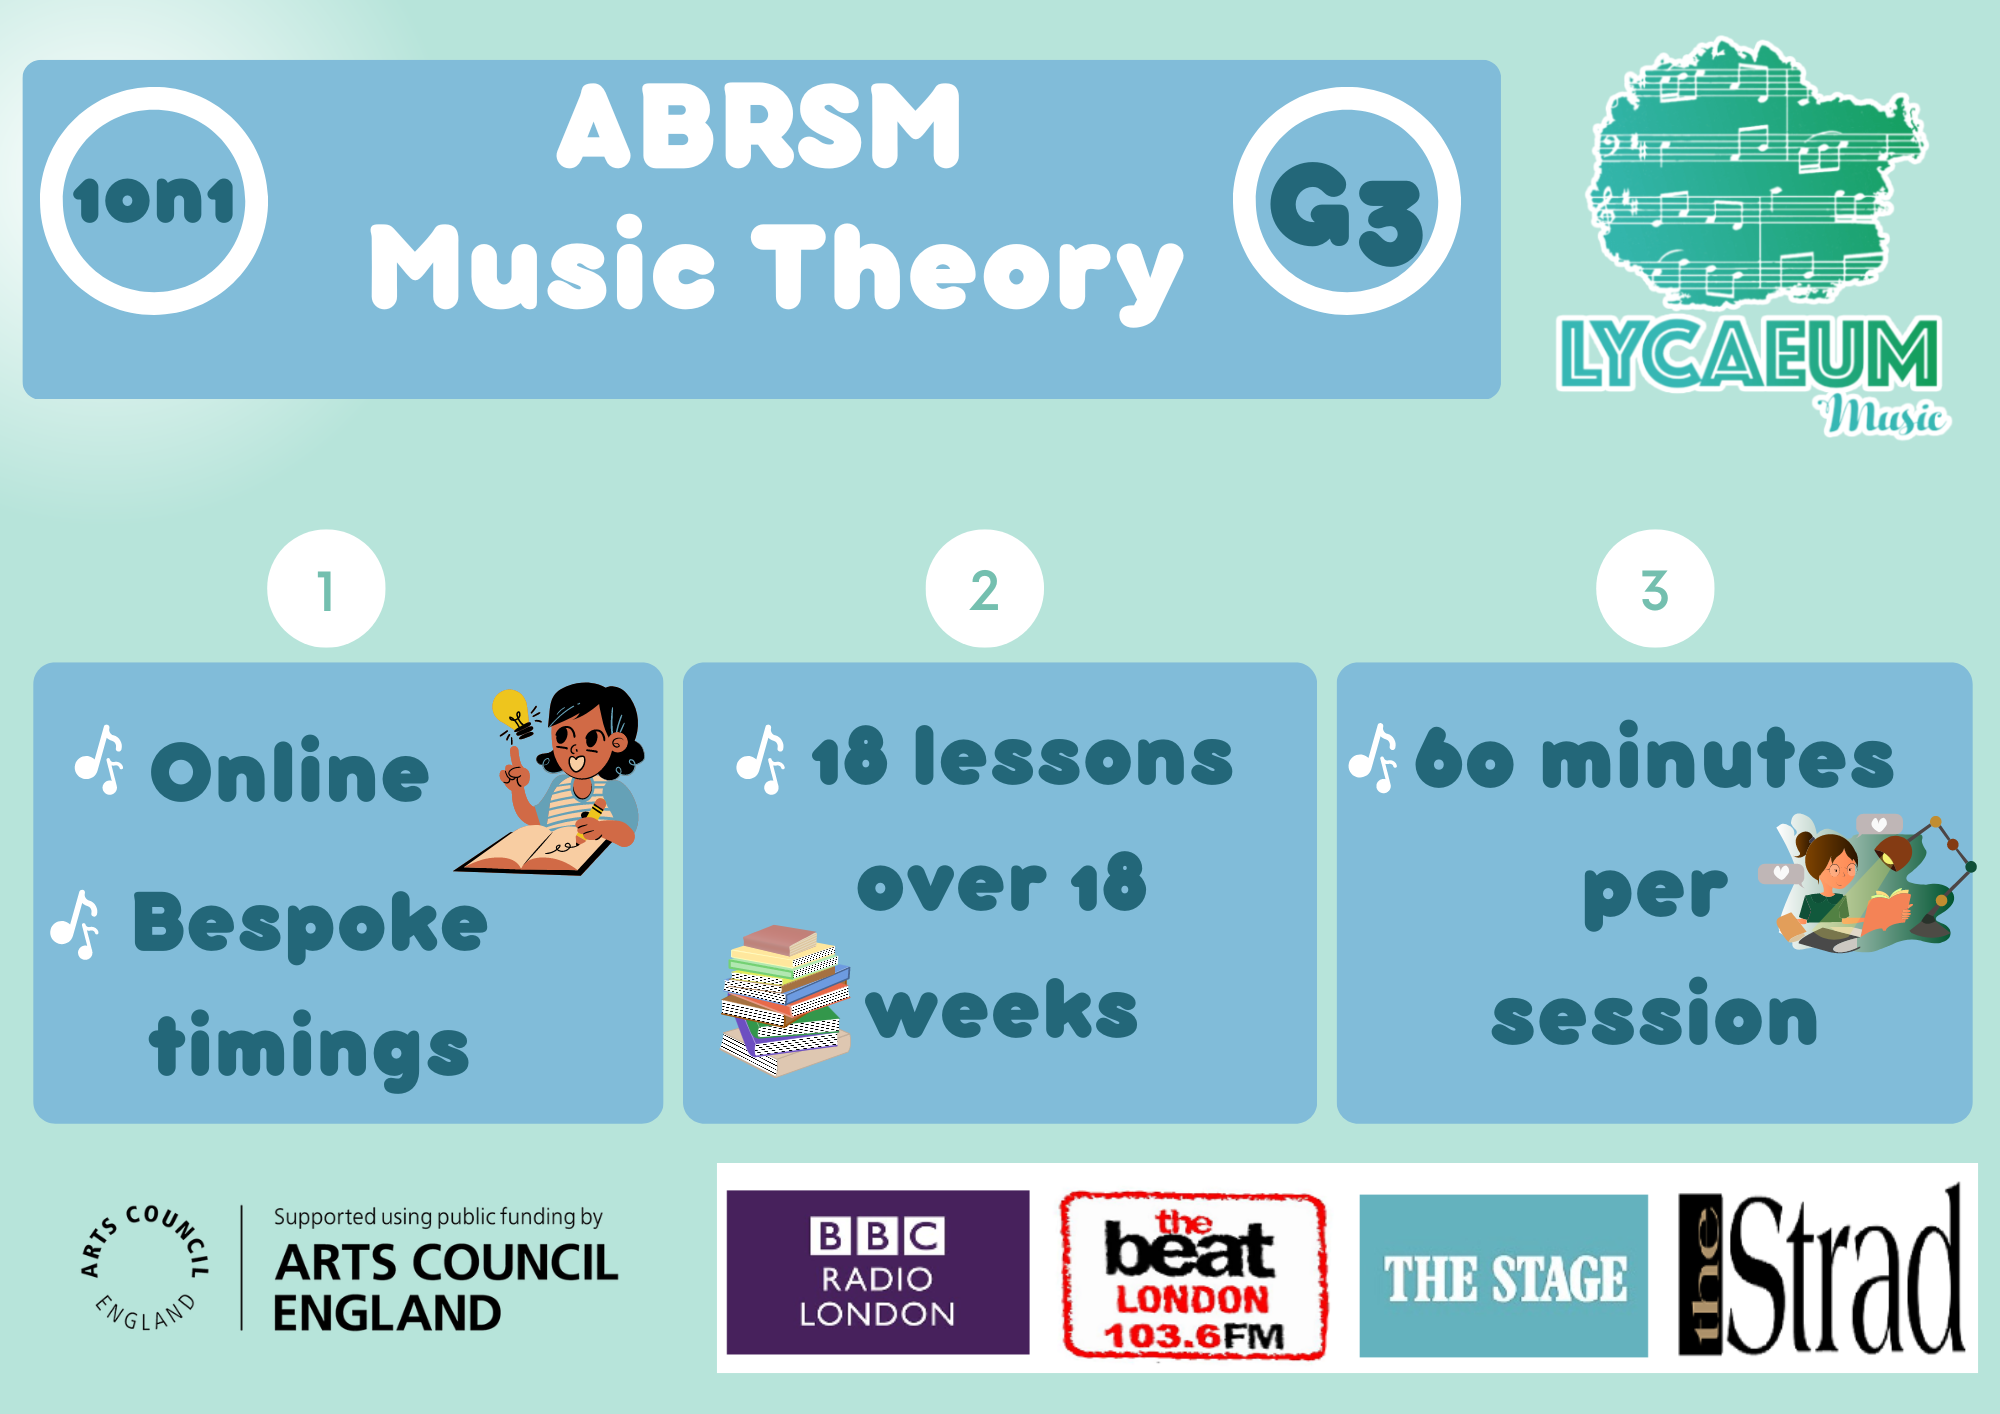 1on1 abrsm music theory: grade 3 – bespoke timings to suit your schedule